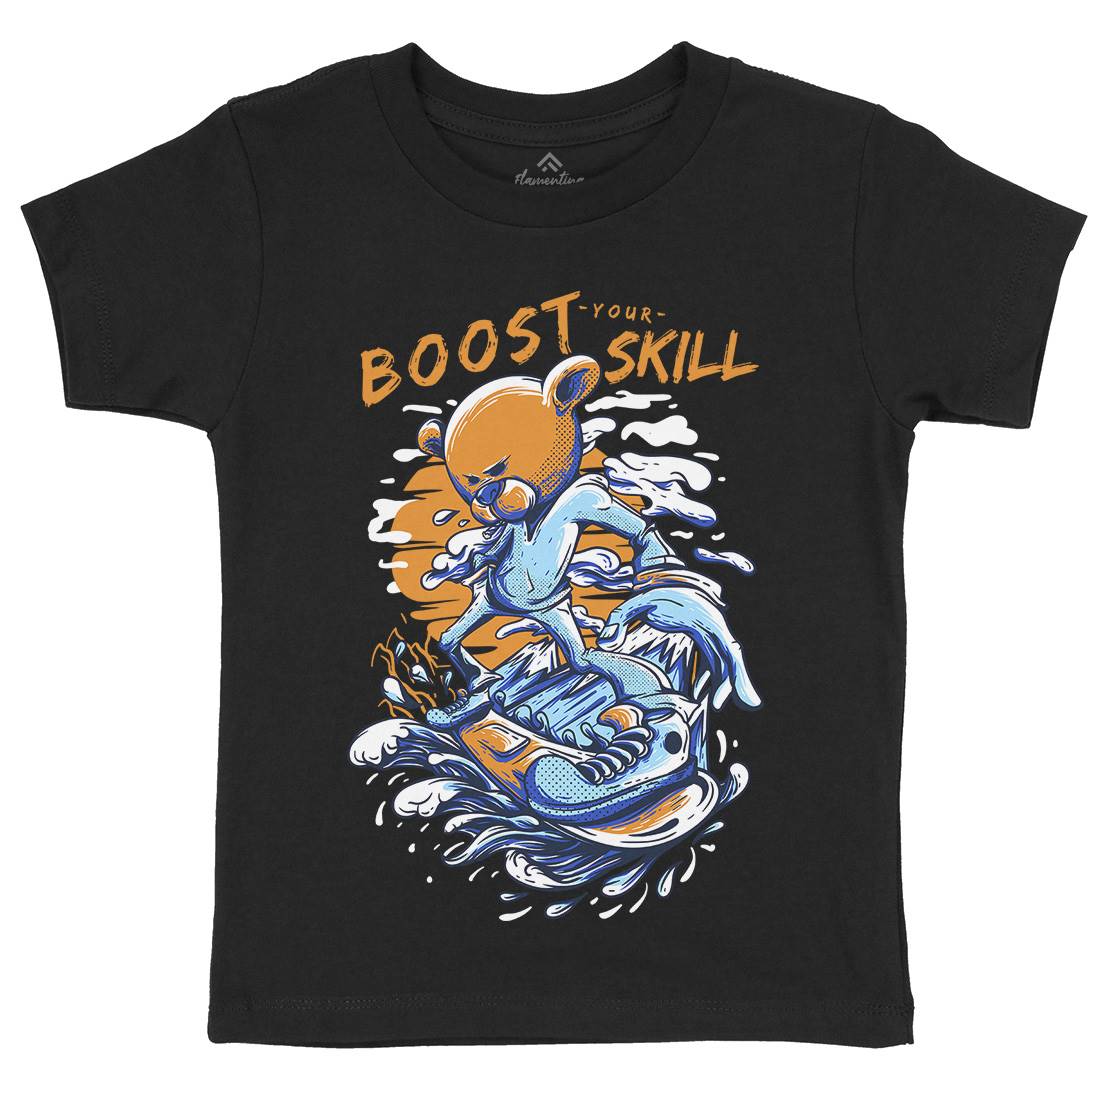 Boost Your Skill Kids Crew Neck T-Shirt Surf D716